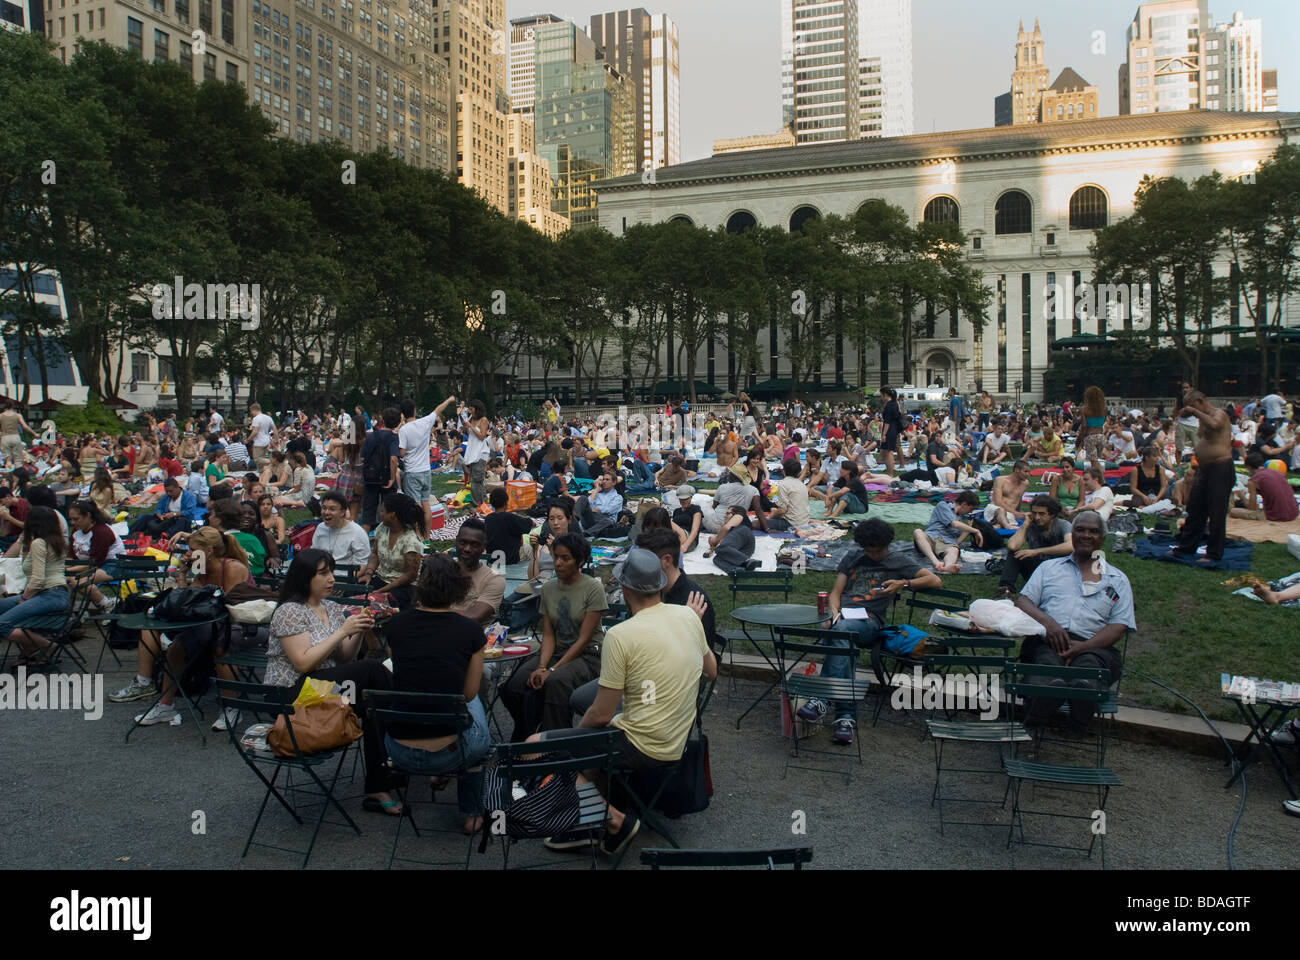 Thousands of people spread their blankets and claim their chairs in Bryant Park in New York on Monday free movie night Stock Photo